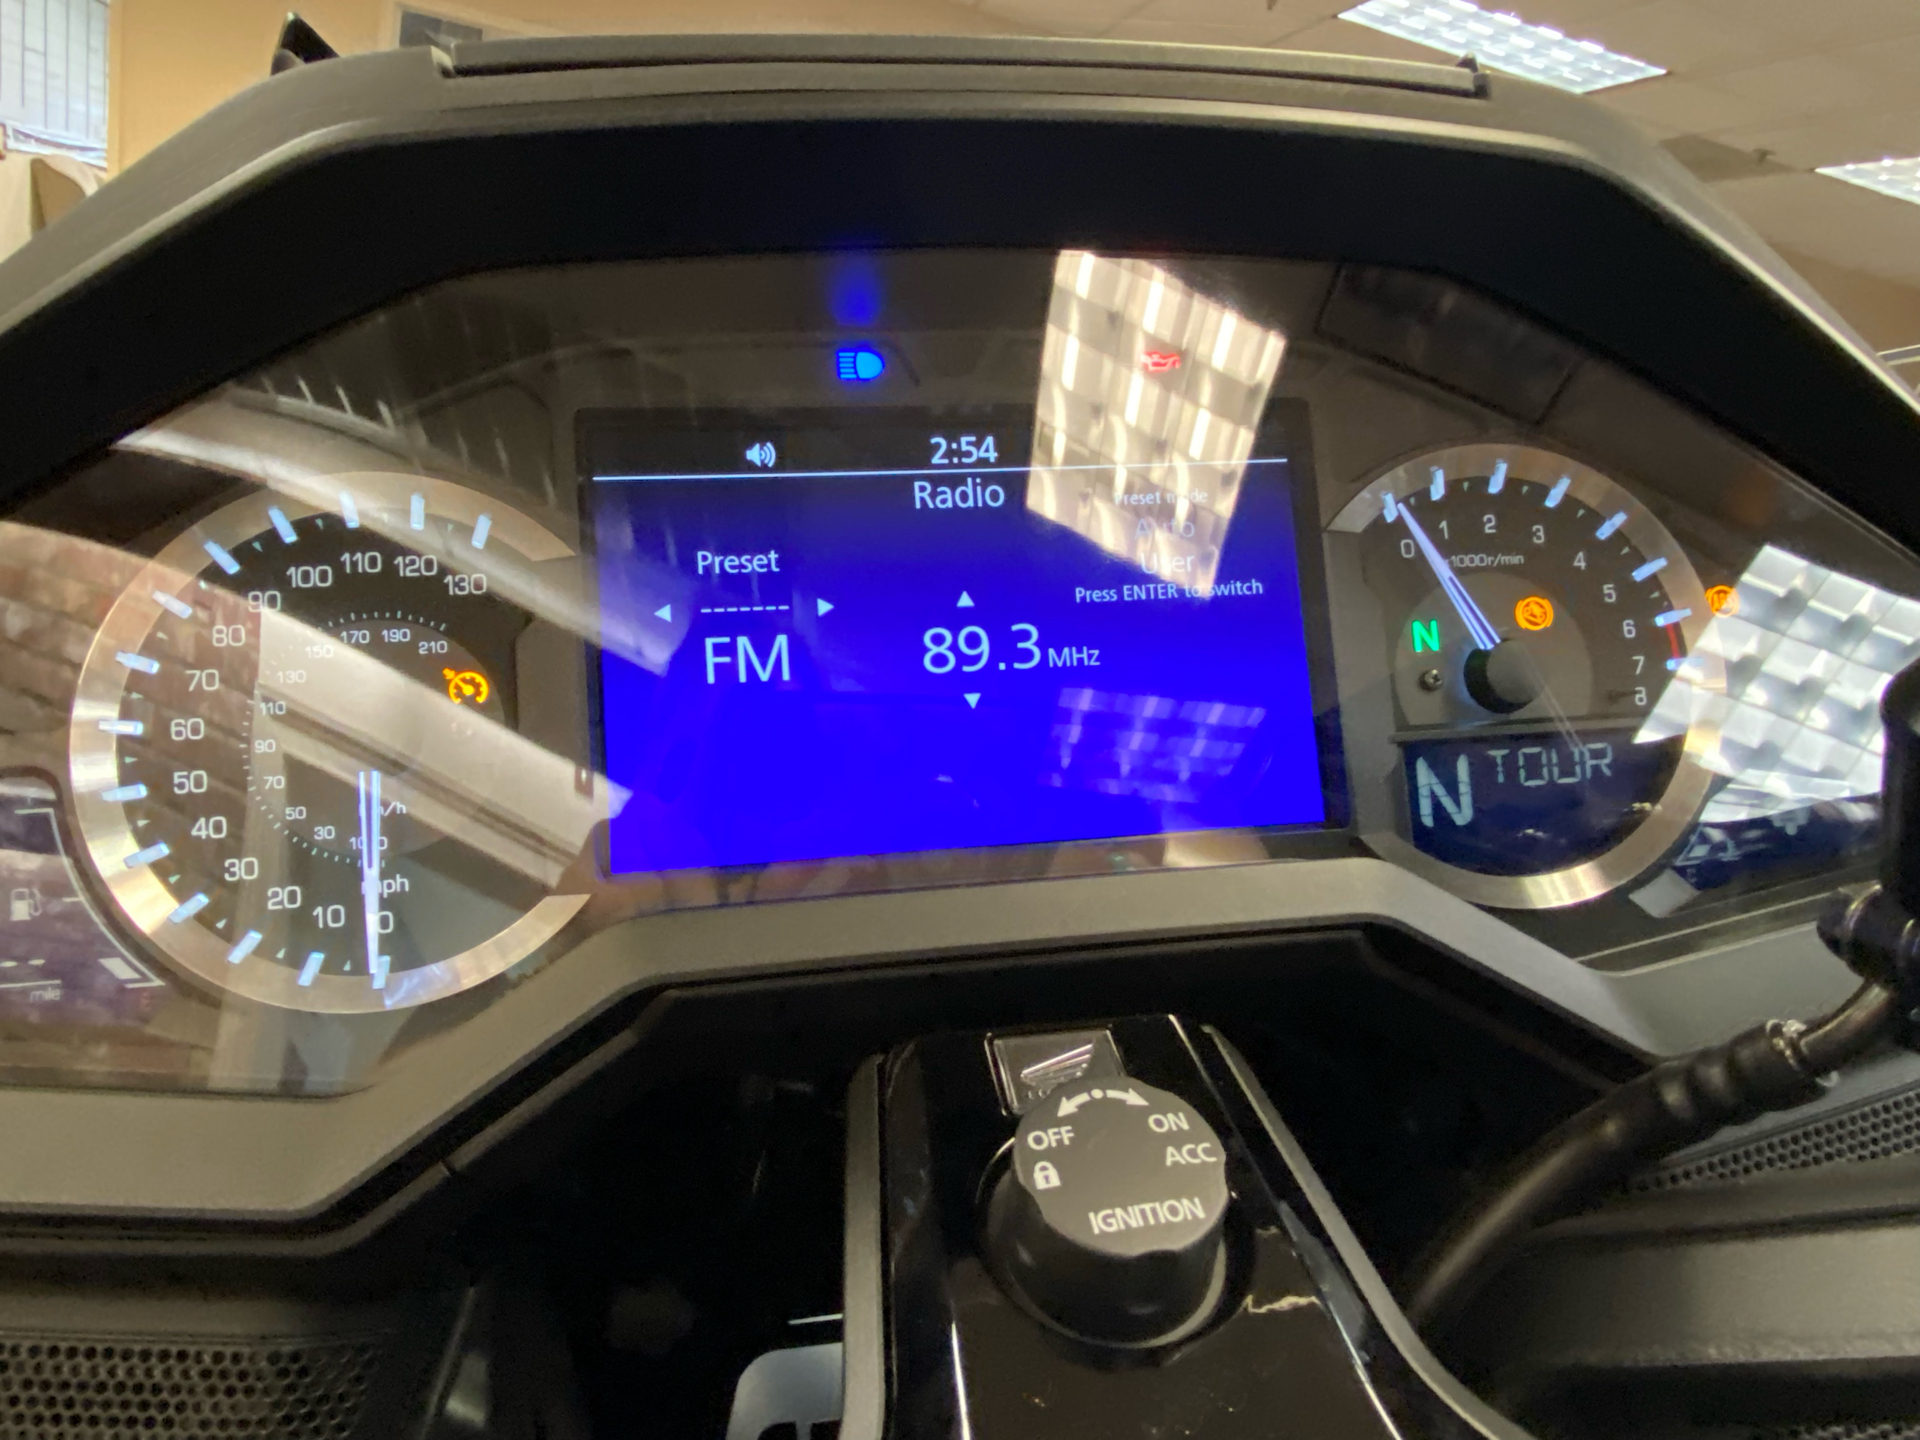 2022 Honda Gold Wing Automatic DCT in Statesville, North Carolina - Photo 9